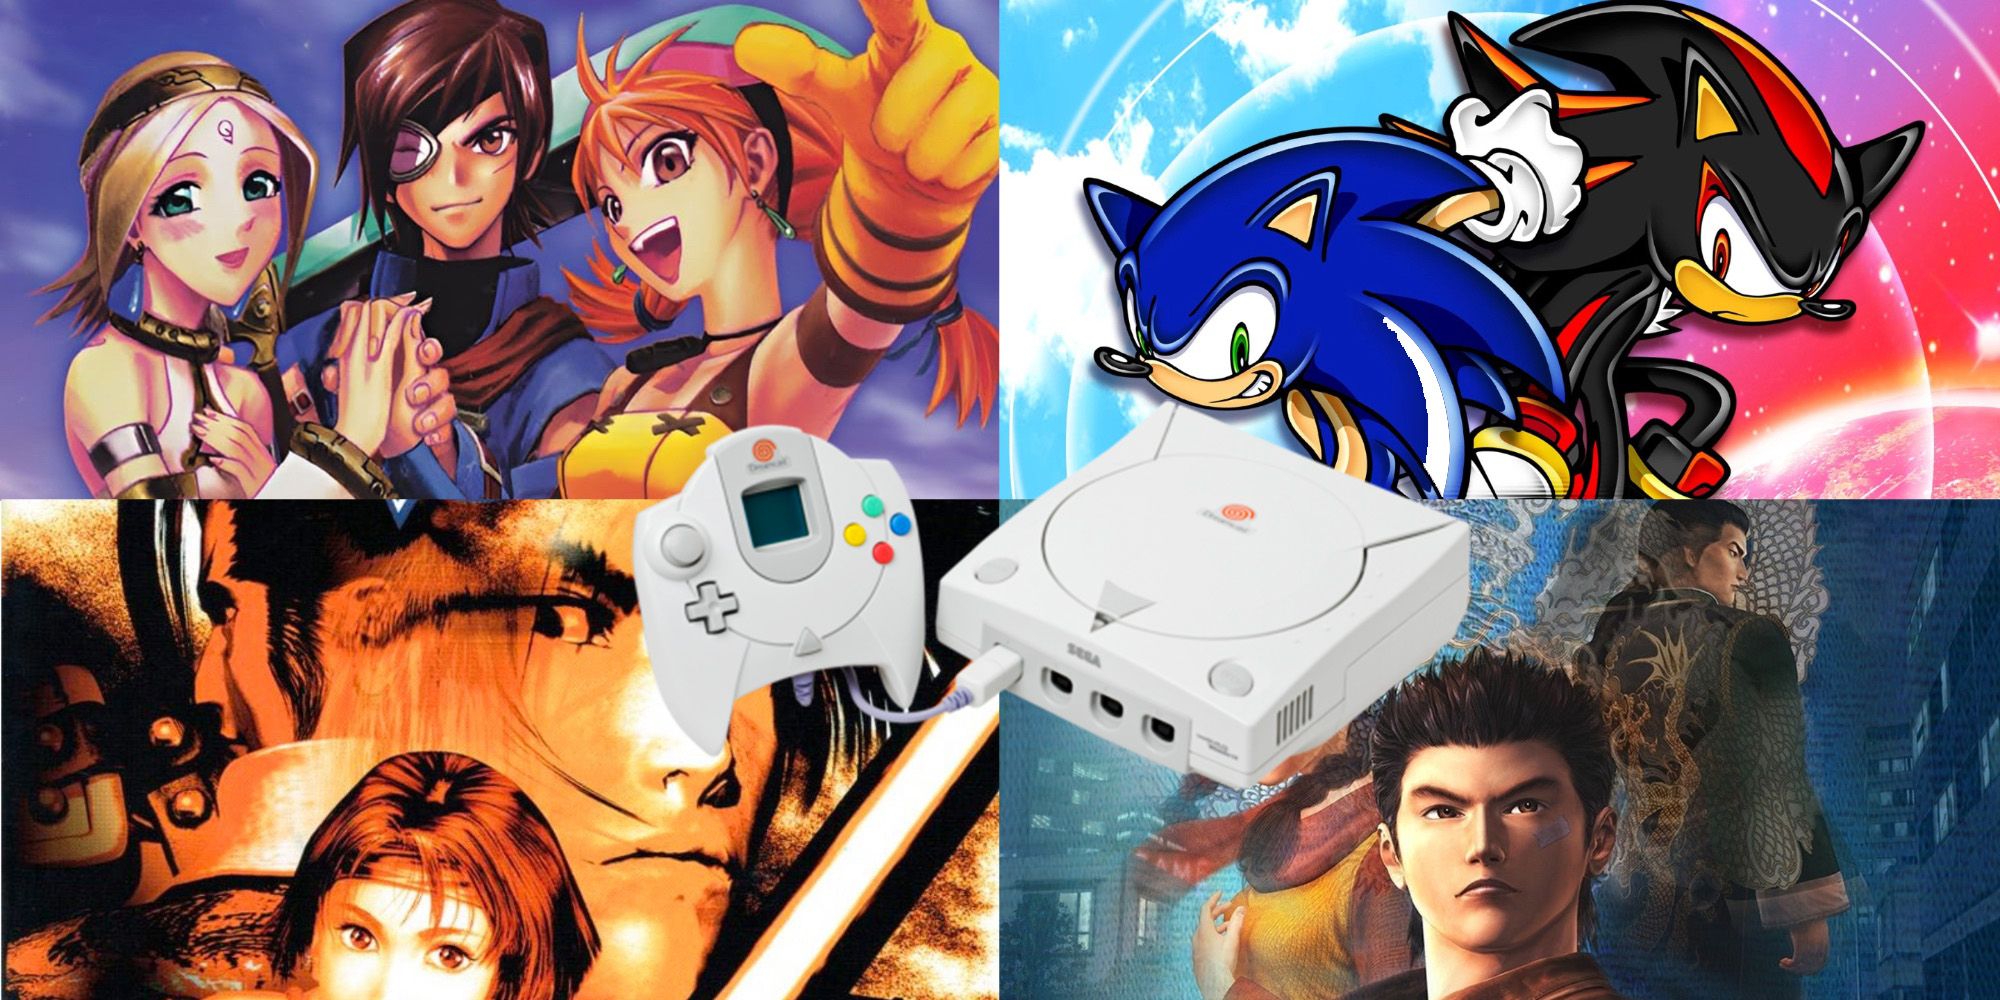 sthe Dreamcast console on backdrop of key cover art for: Skies of Arcadia, soulcalibur, sonic adventure 2 and Shenmue